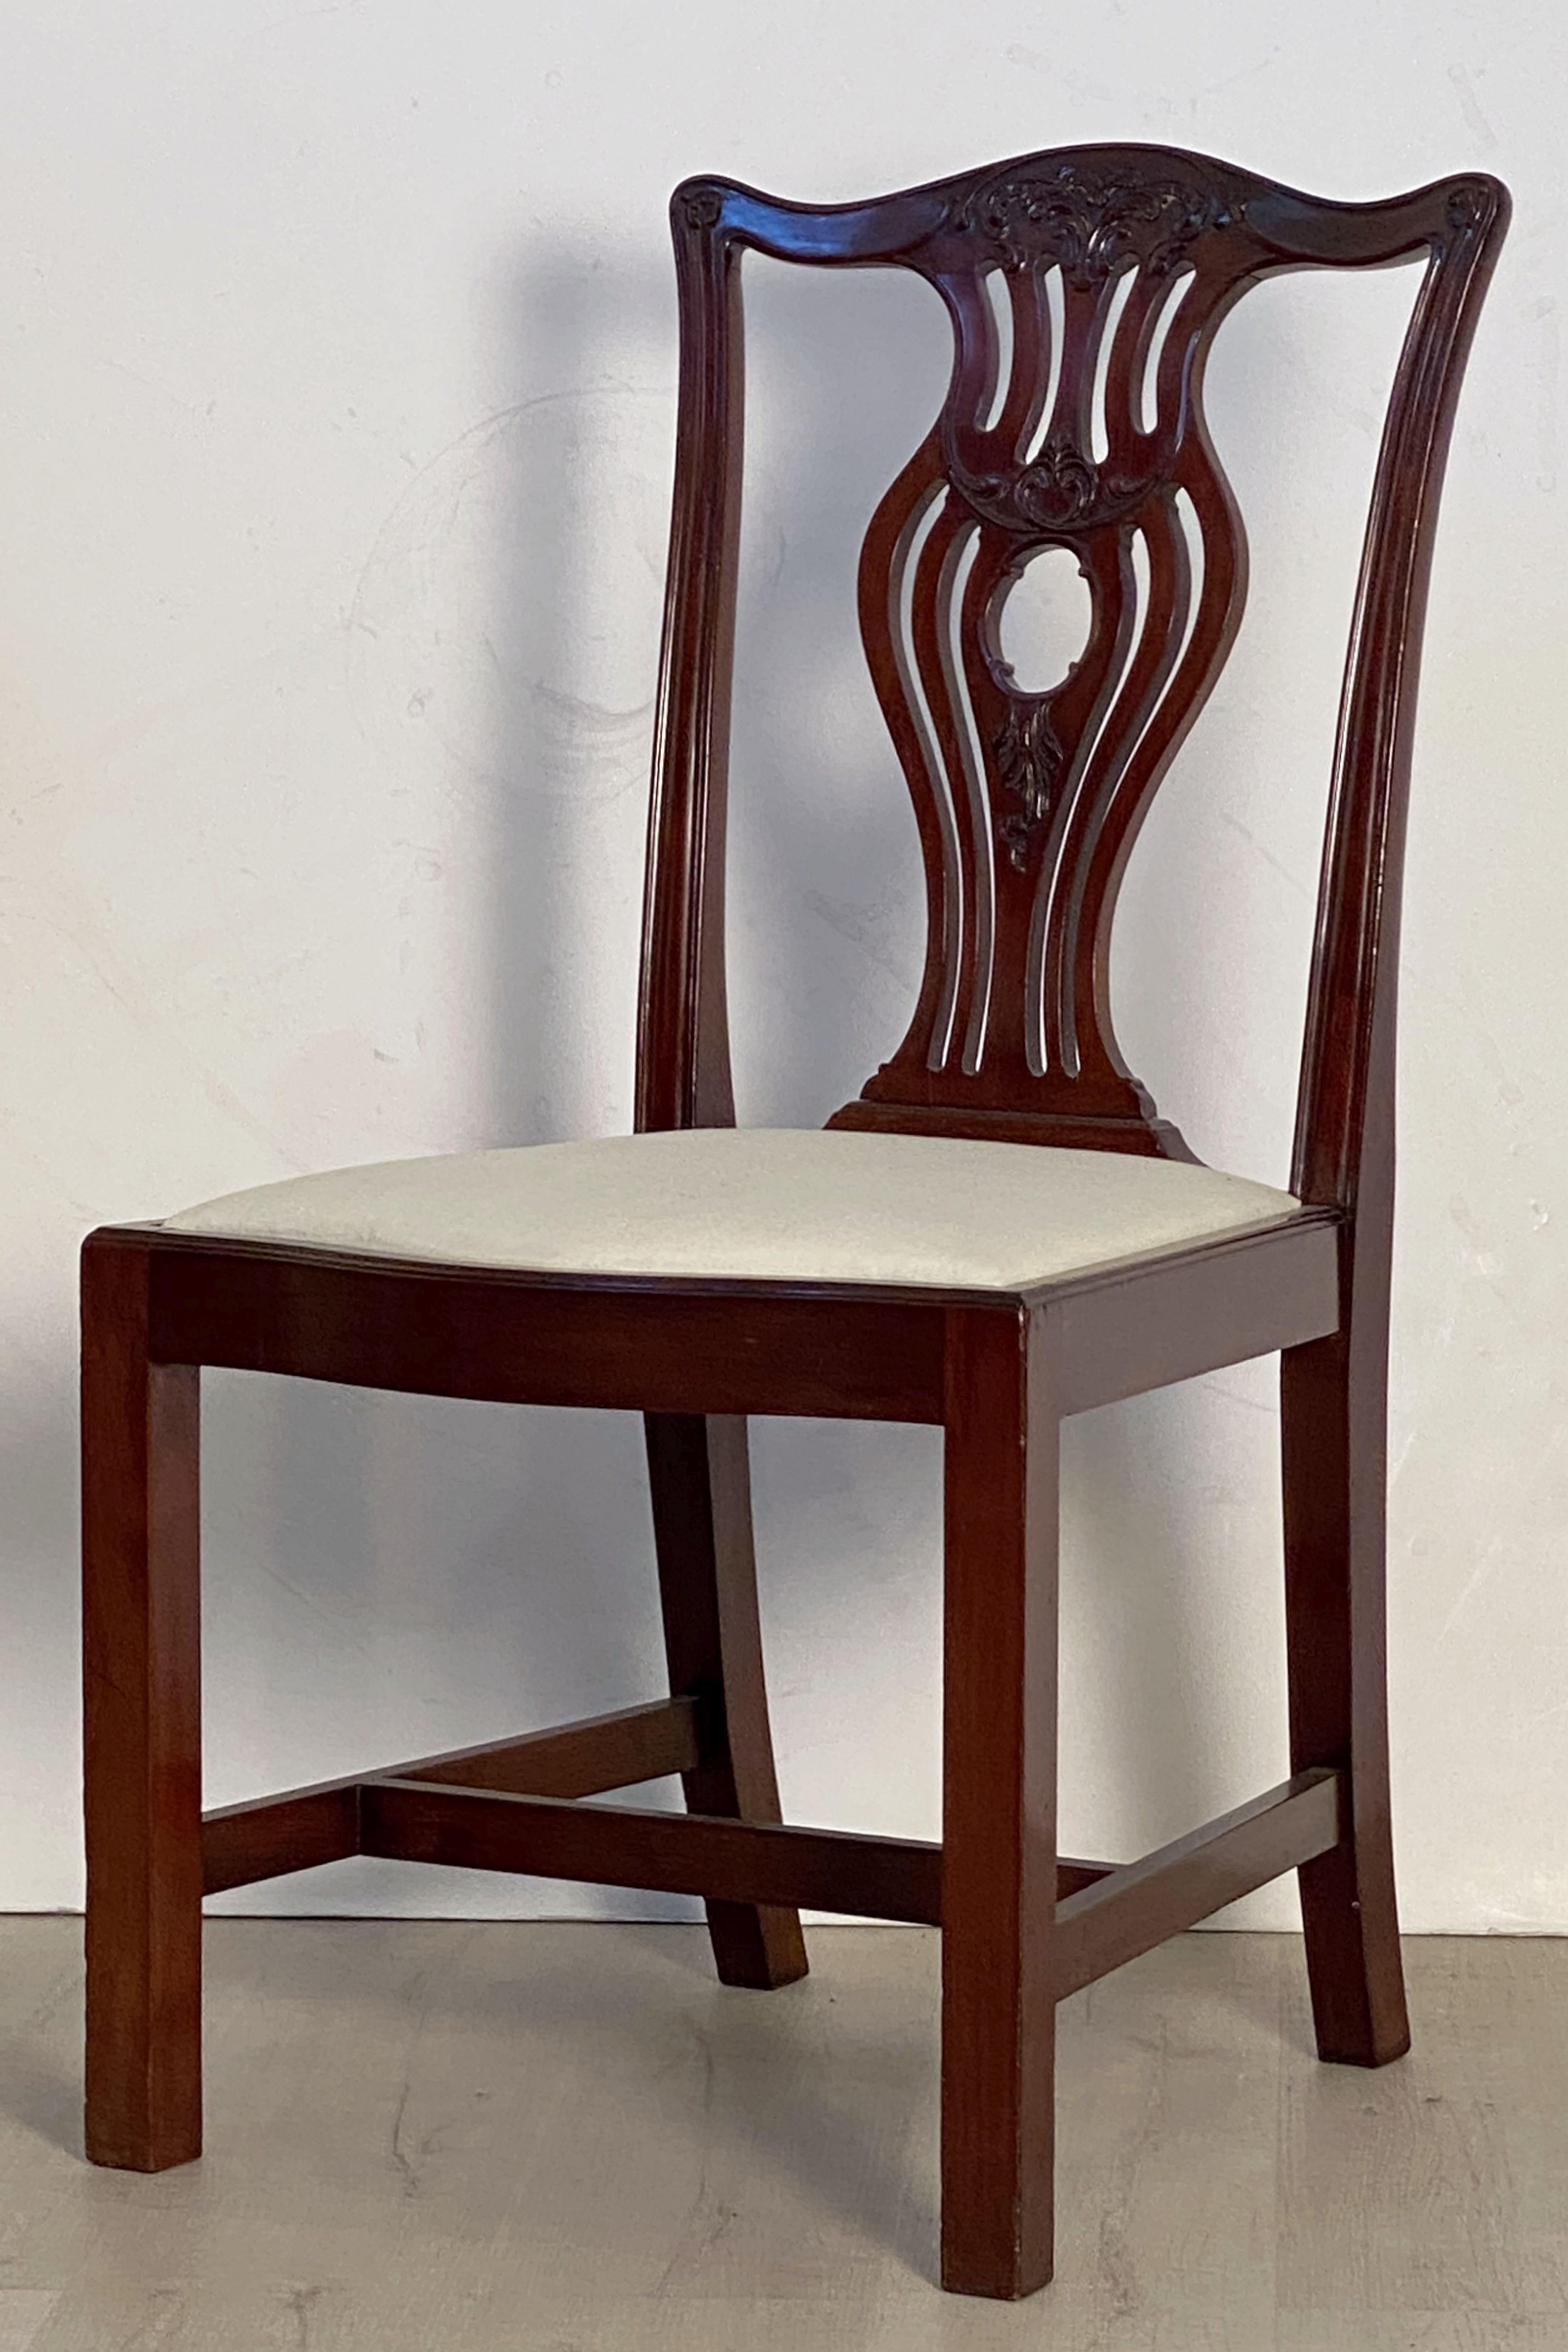 Set of Six English Dining Chairs of Mahogany in the Art Nouveau Style 1